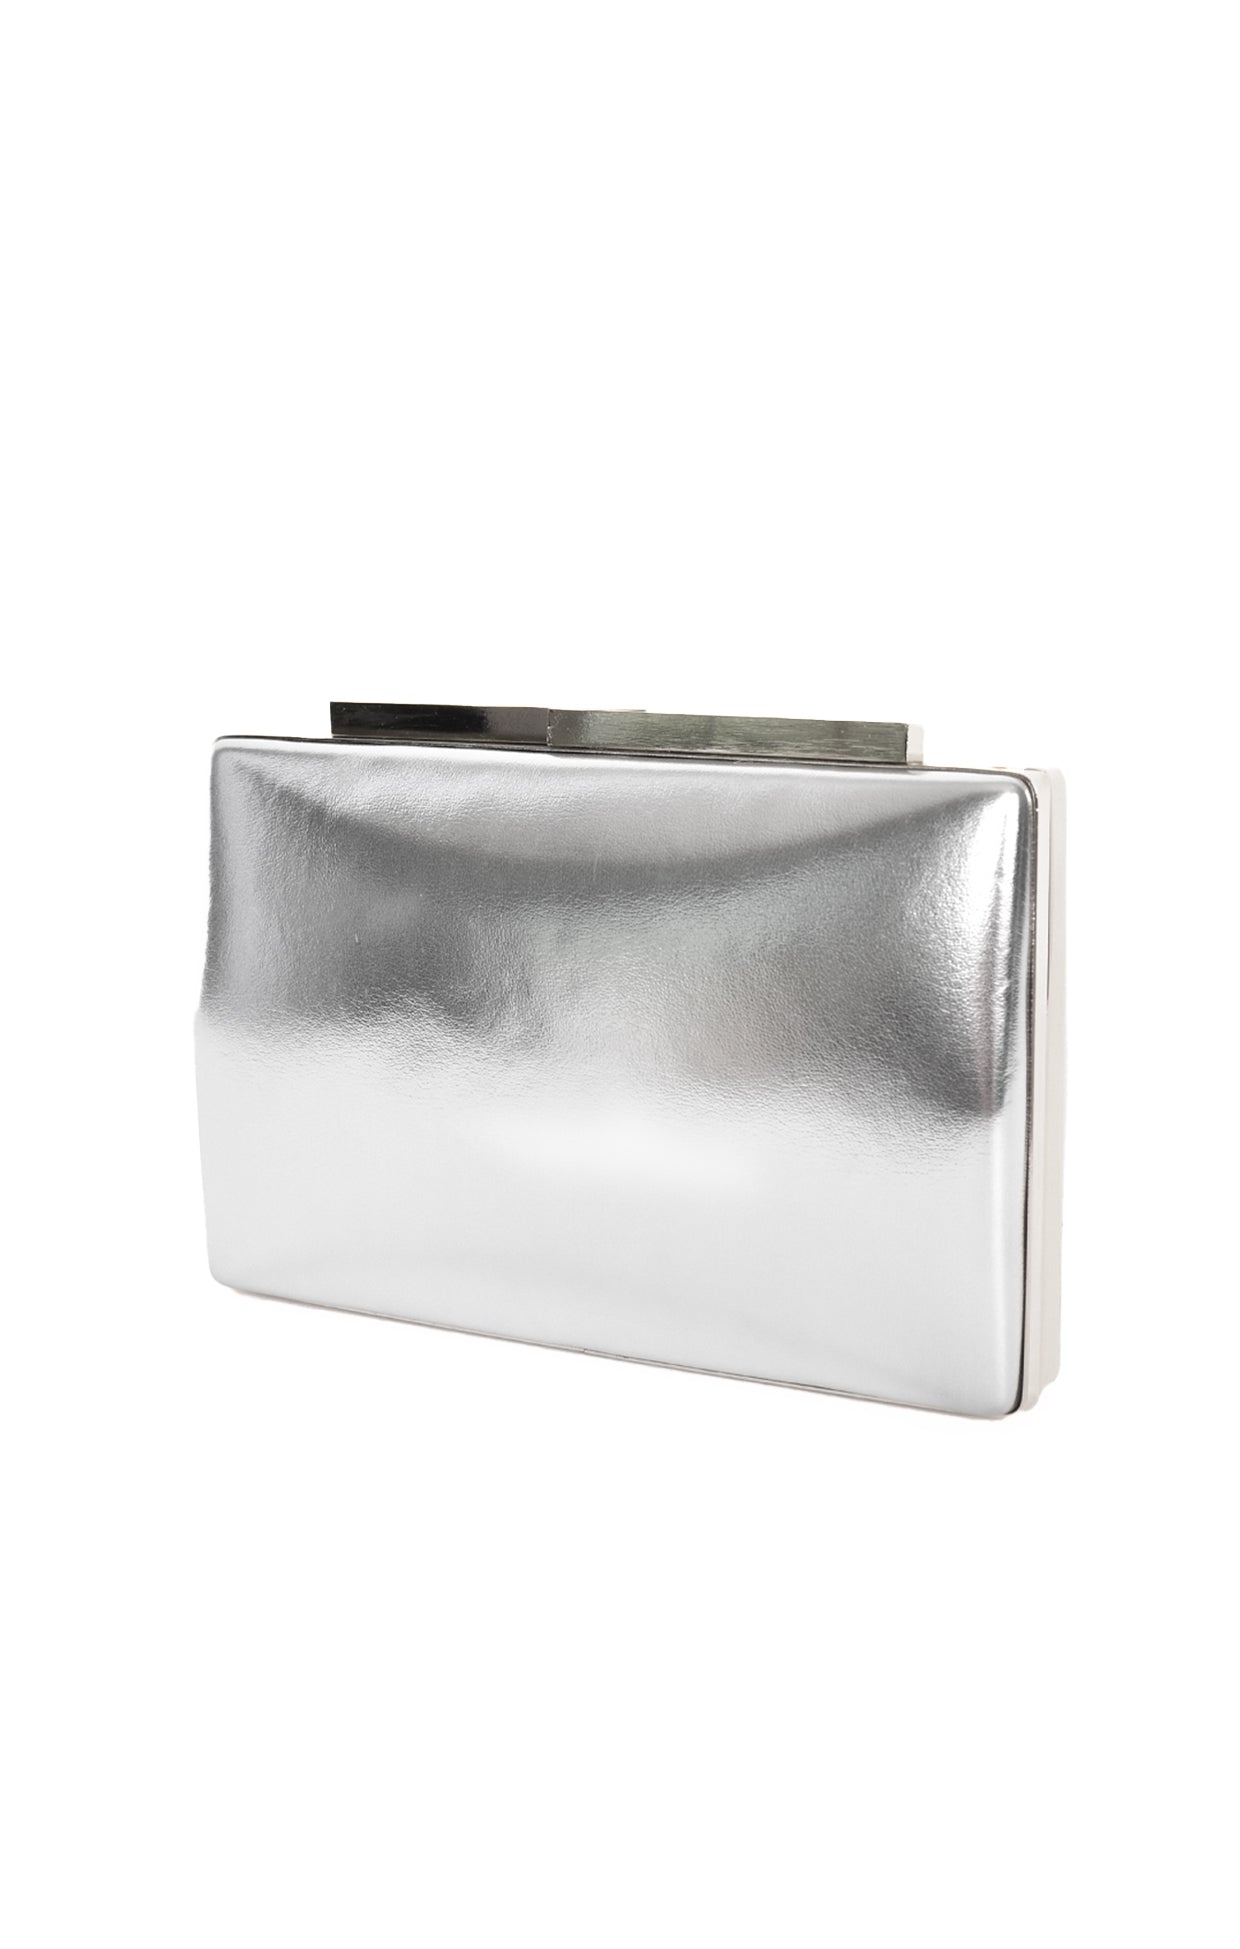 ACCESSORIES Bags Clutches One Size / Neutral METALLIC STRUCTURED CLUTCH IN SILVER